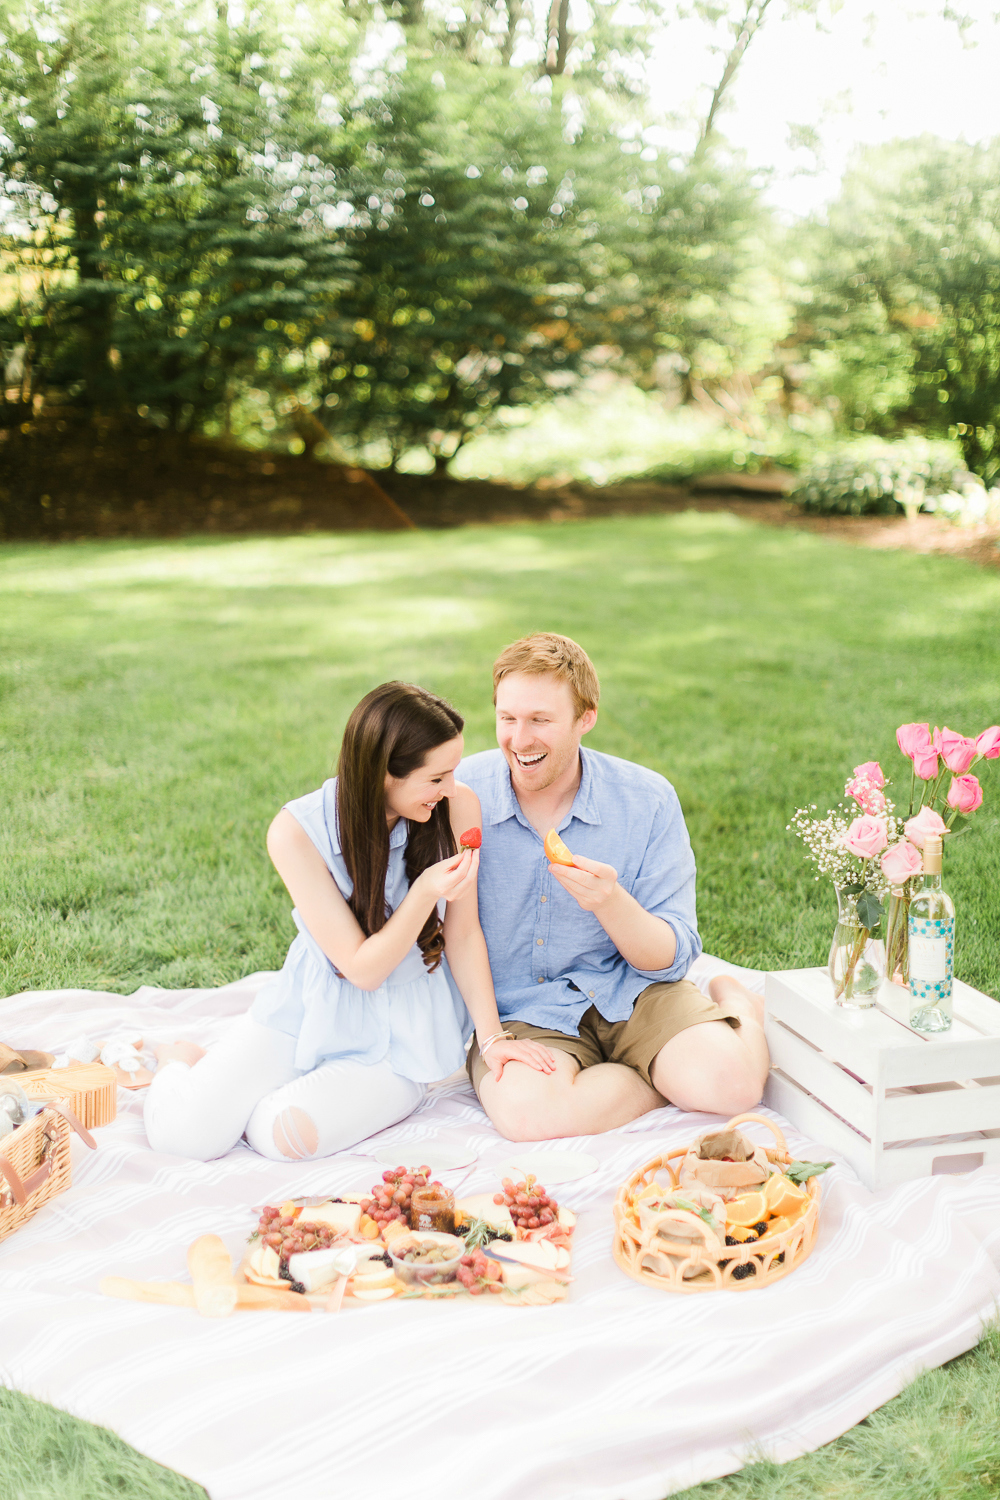 Date Night: How to Plan the Perfect Summer Picnic by Missouri blogger Stephanie Ziajka from Diary of a Debutante, romantic picnic ideas for him, the perfect picnic date, what to bring on a picnic date, what to take on a picnic date, cute picnic date ideas, how to plan a picnic date, AVA Grace wine review